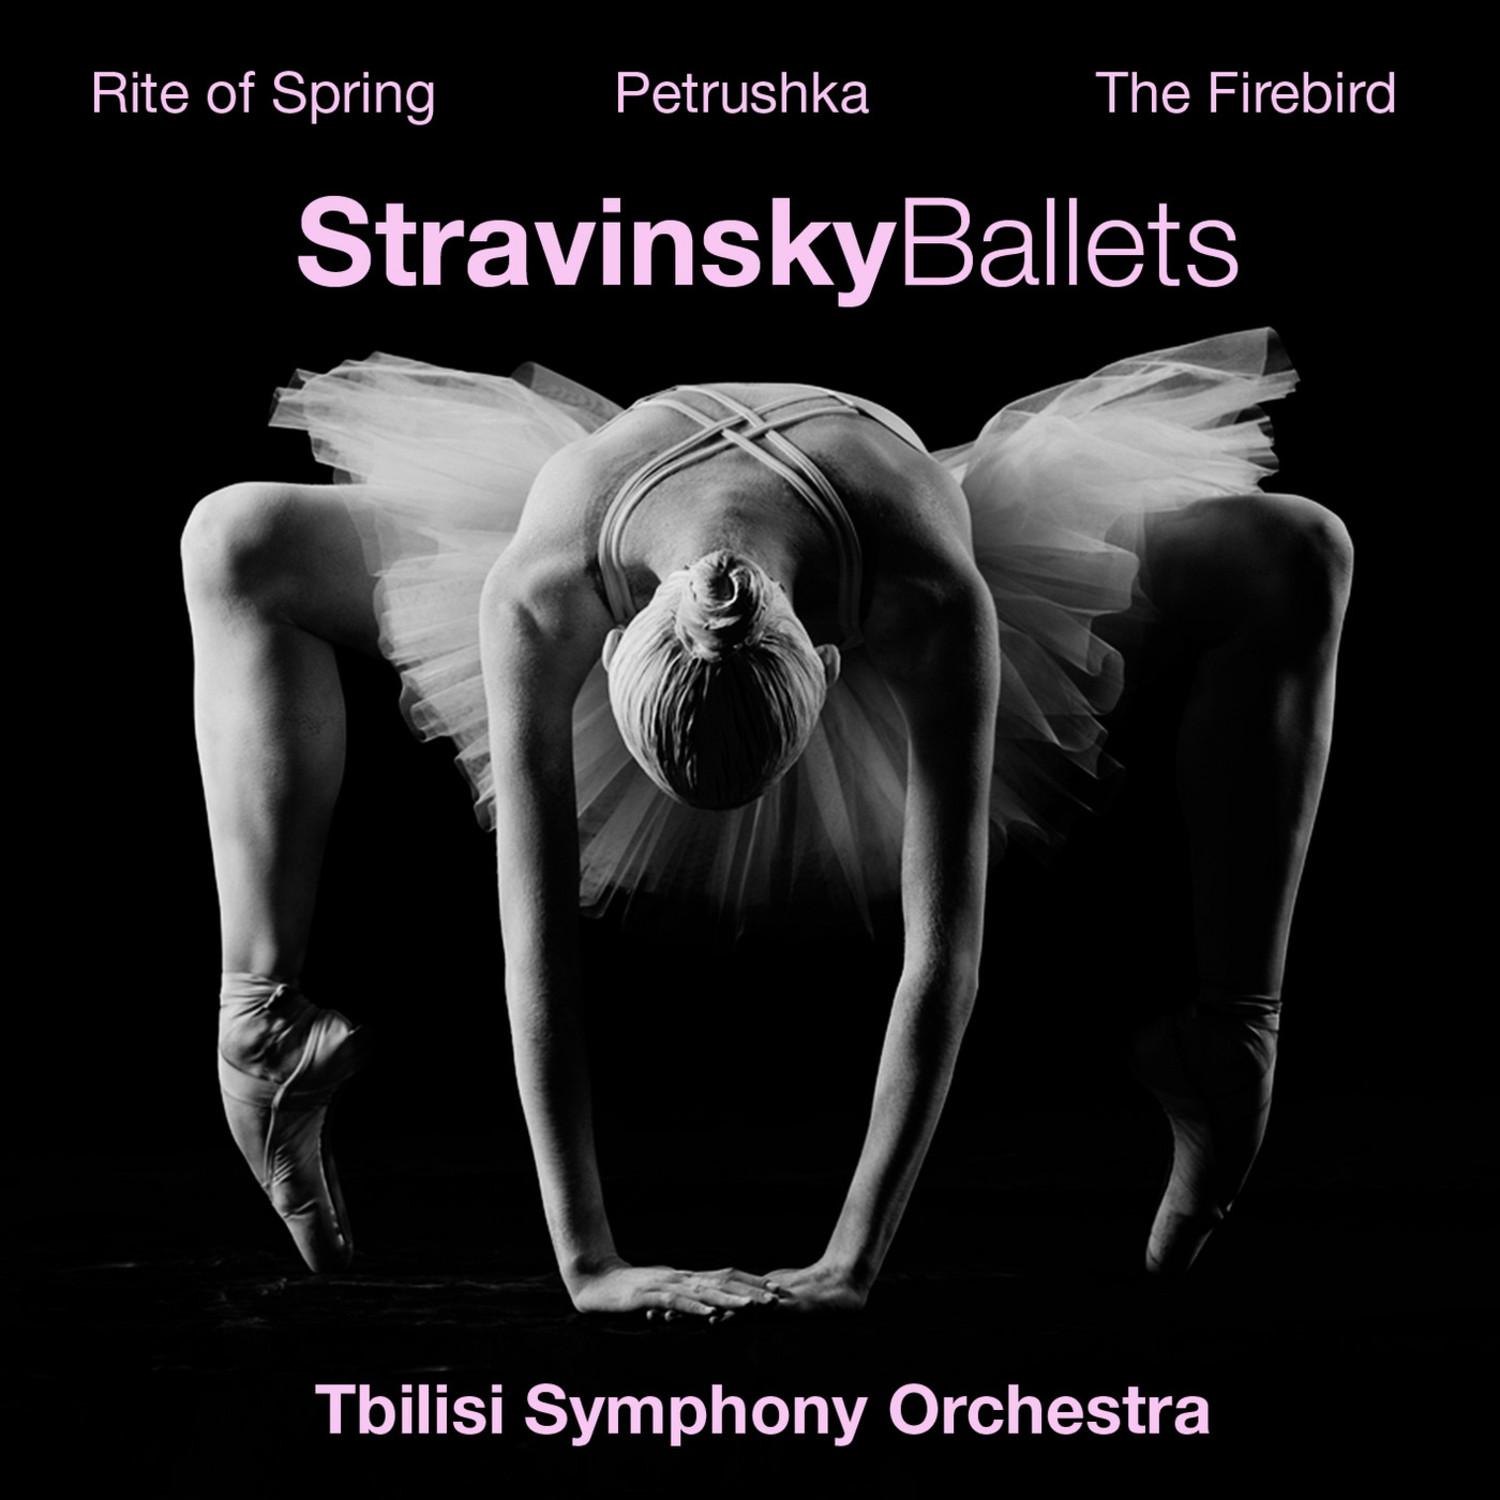 Petrushka Ballet Suite - Burlesque in Four Scenes: Part IV. The Shrovetide Fair in the Evening: V. Dance of the Coachmen and Grooms